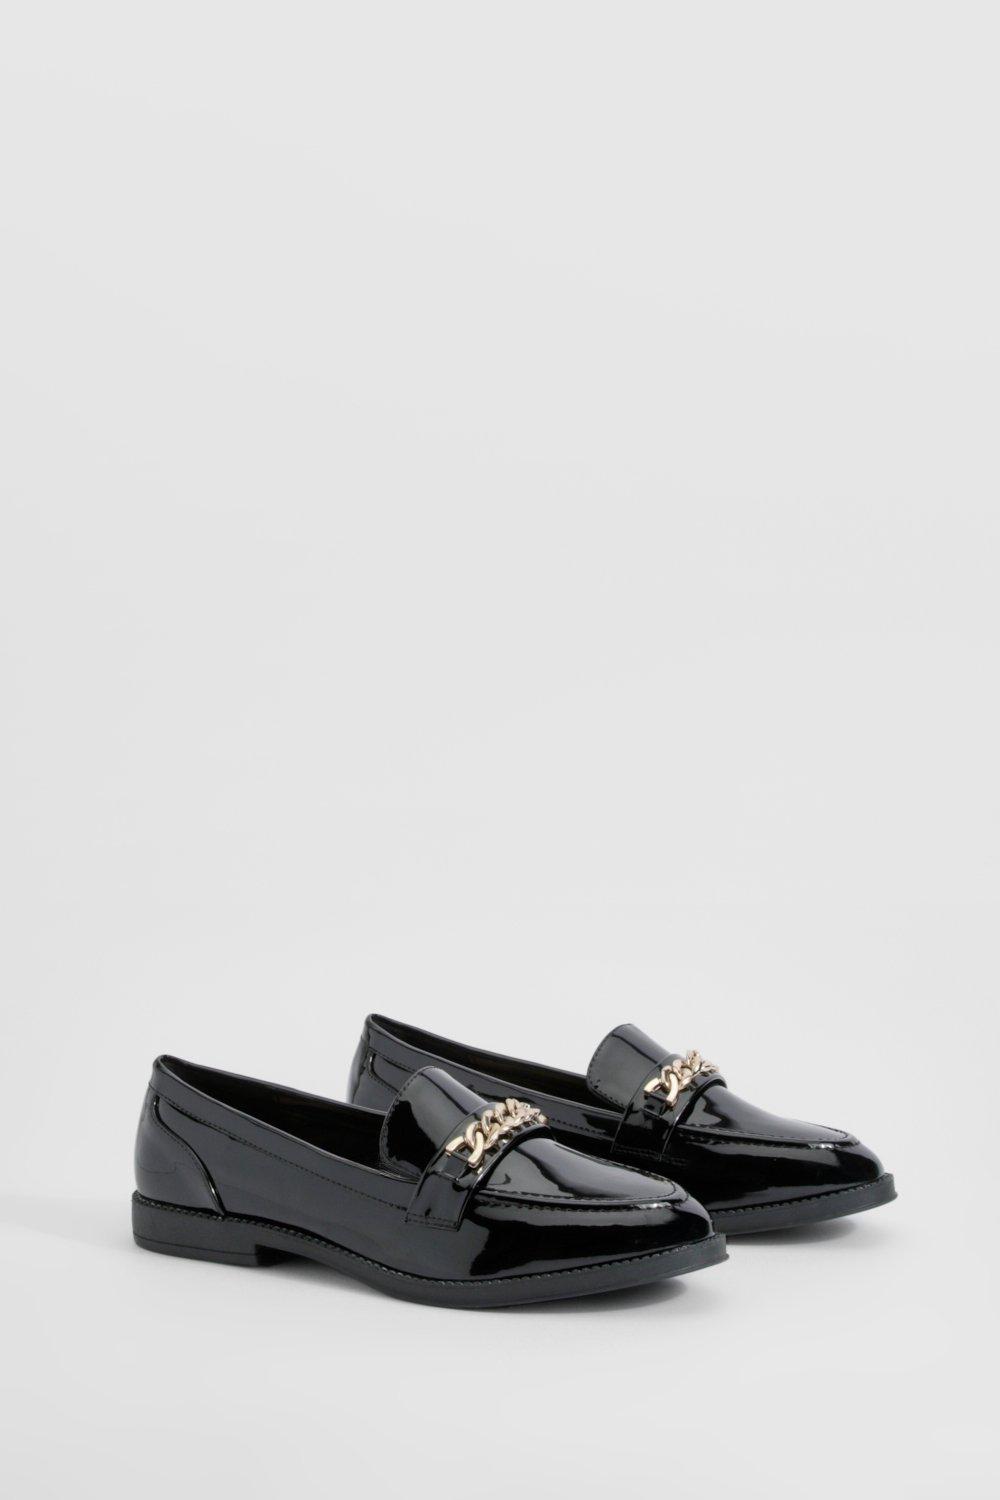 Boohoo Wide Fit Chain Trim Patent Loafers, Black